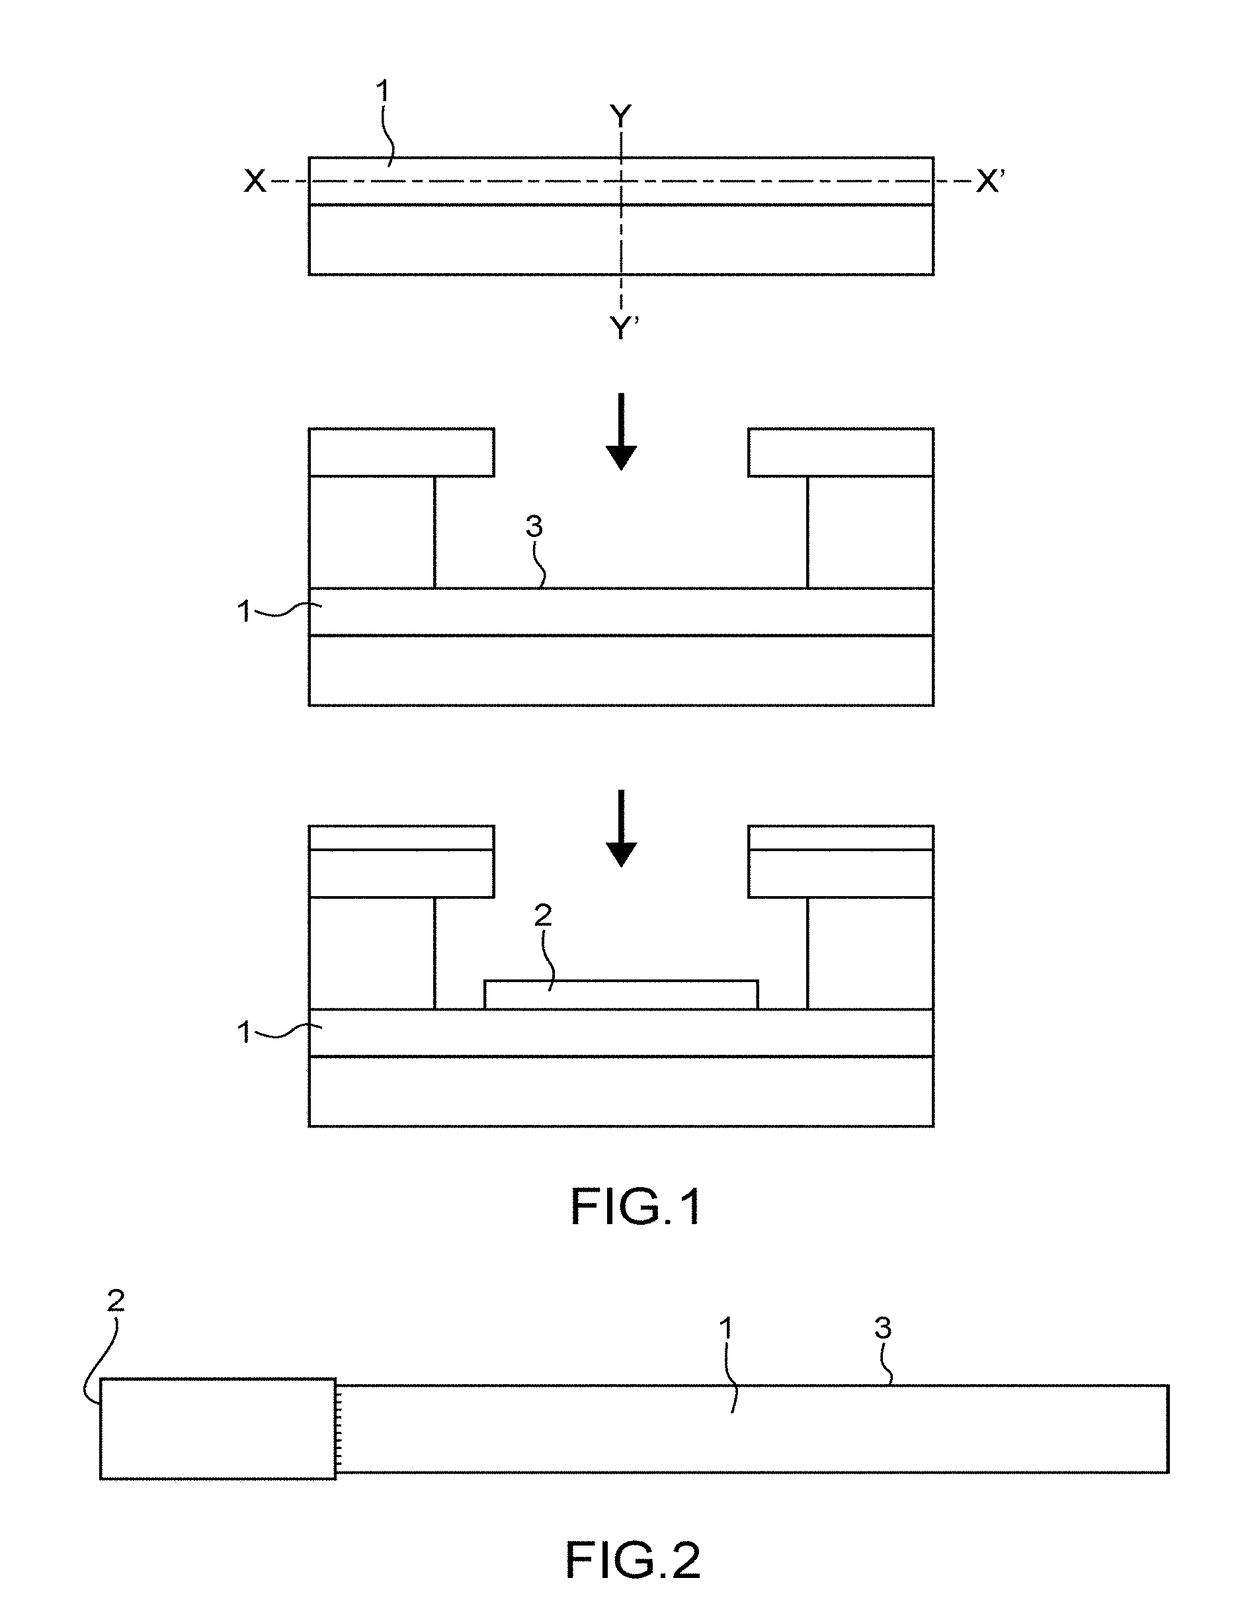 METHOD FOR MANUFACTURlNG AN ELECTRICAL CONTACT ON A STRUCTURE